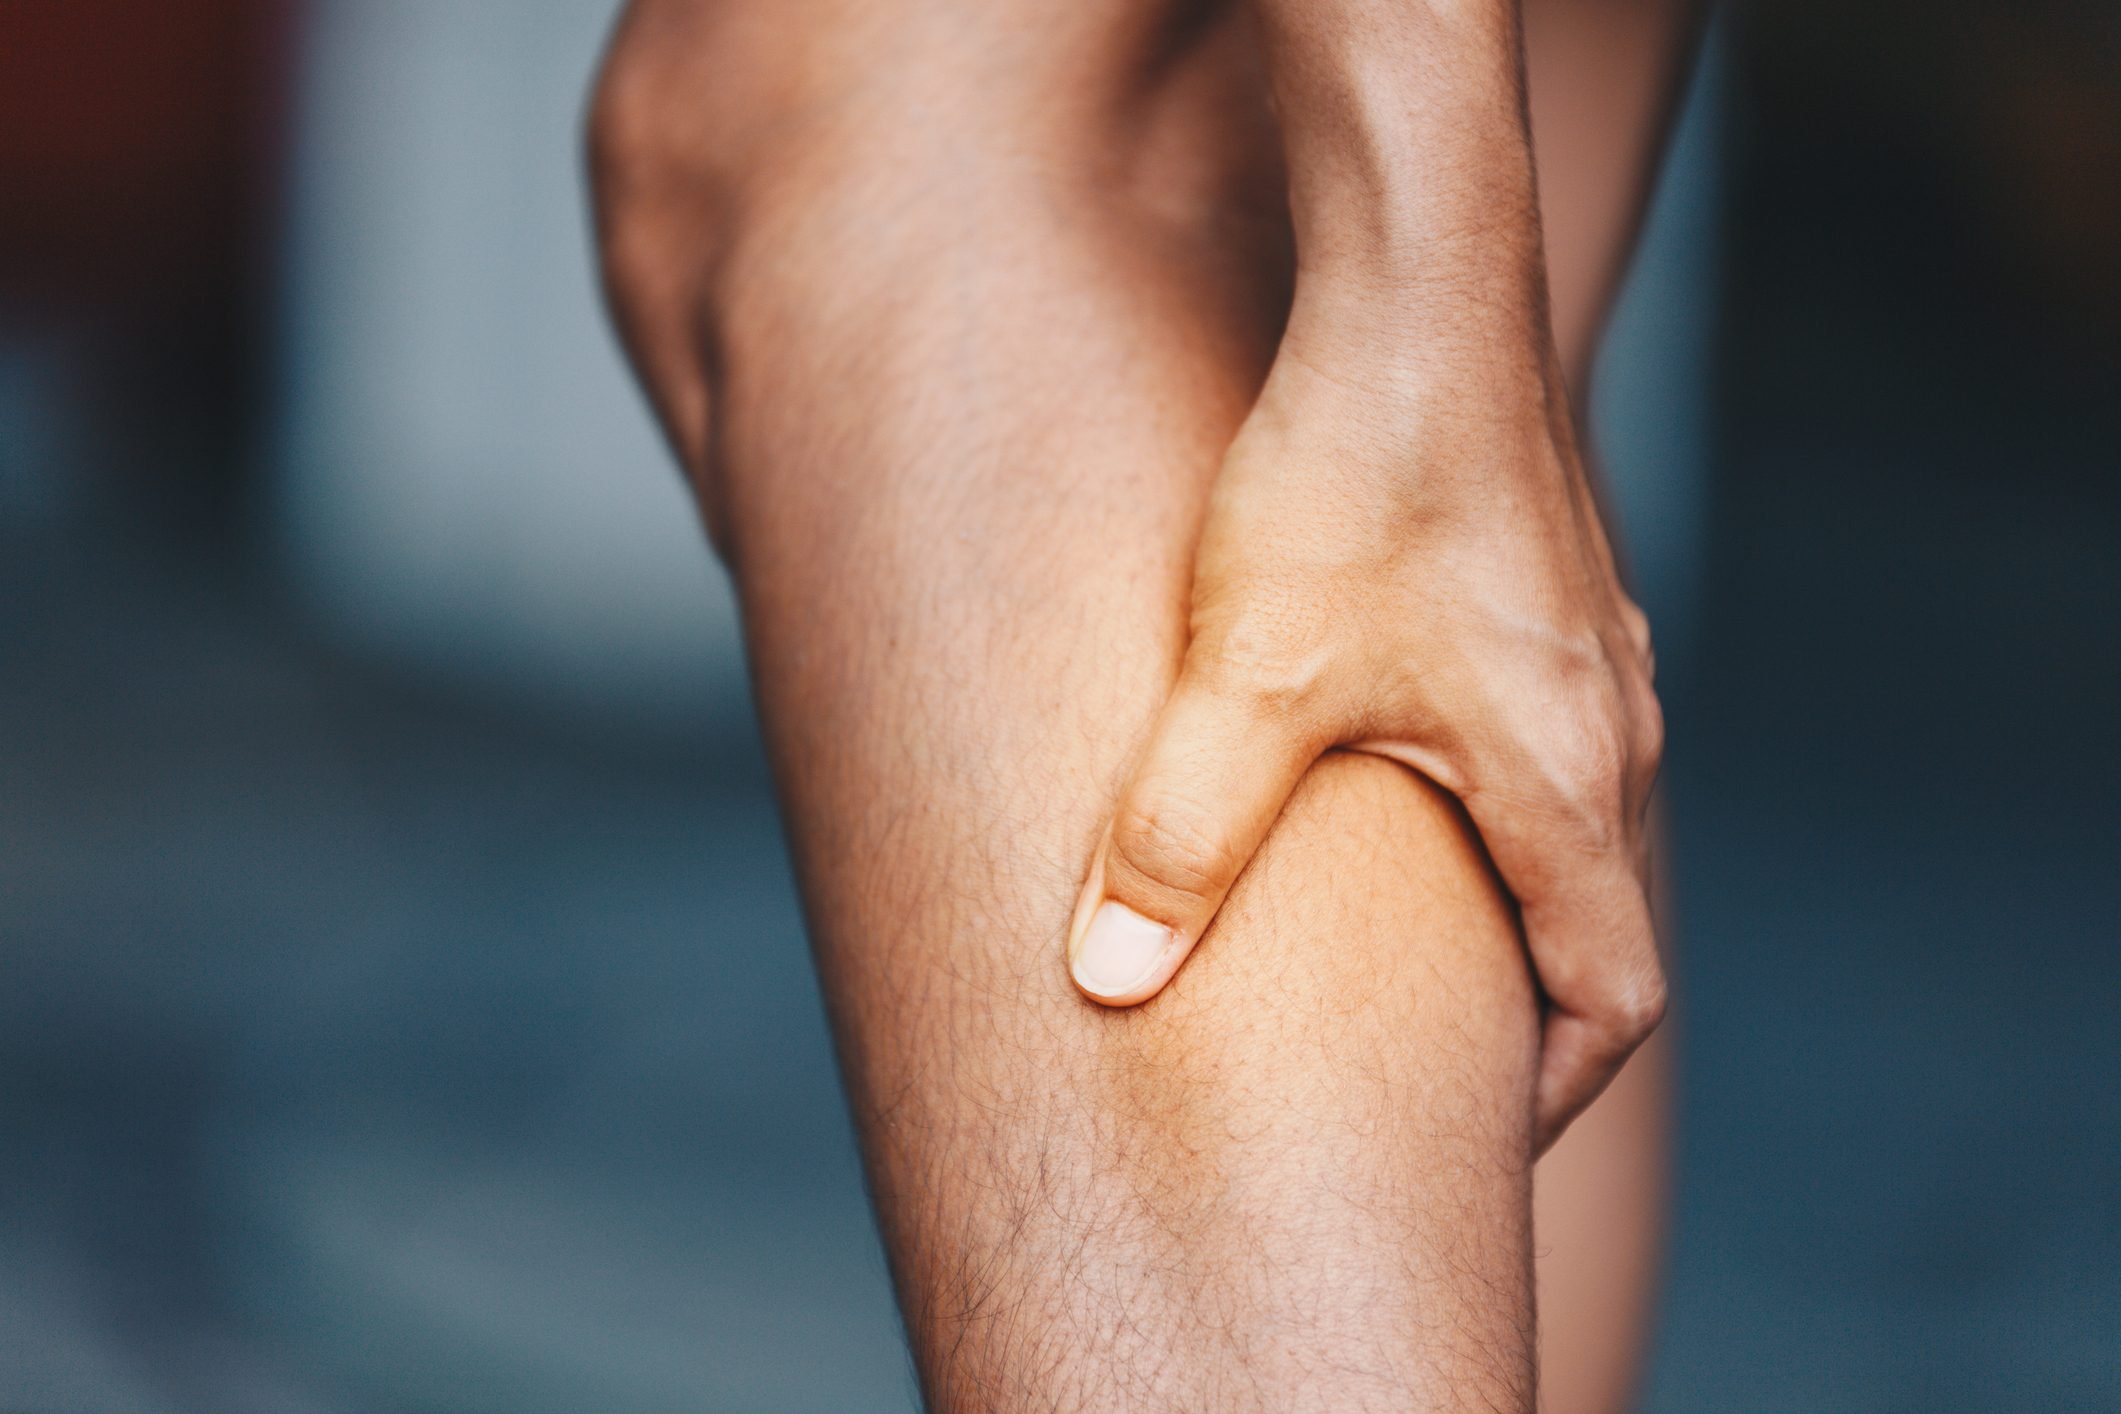 8 Causes of Calf Pain